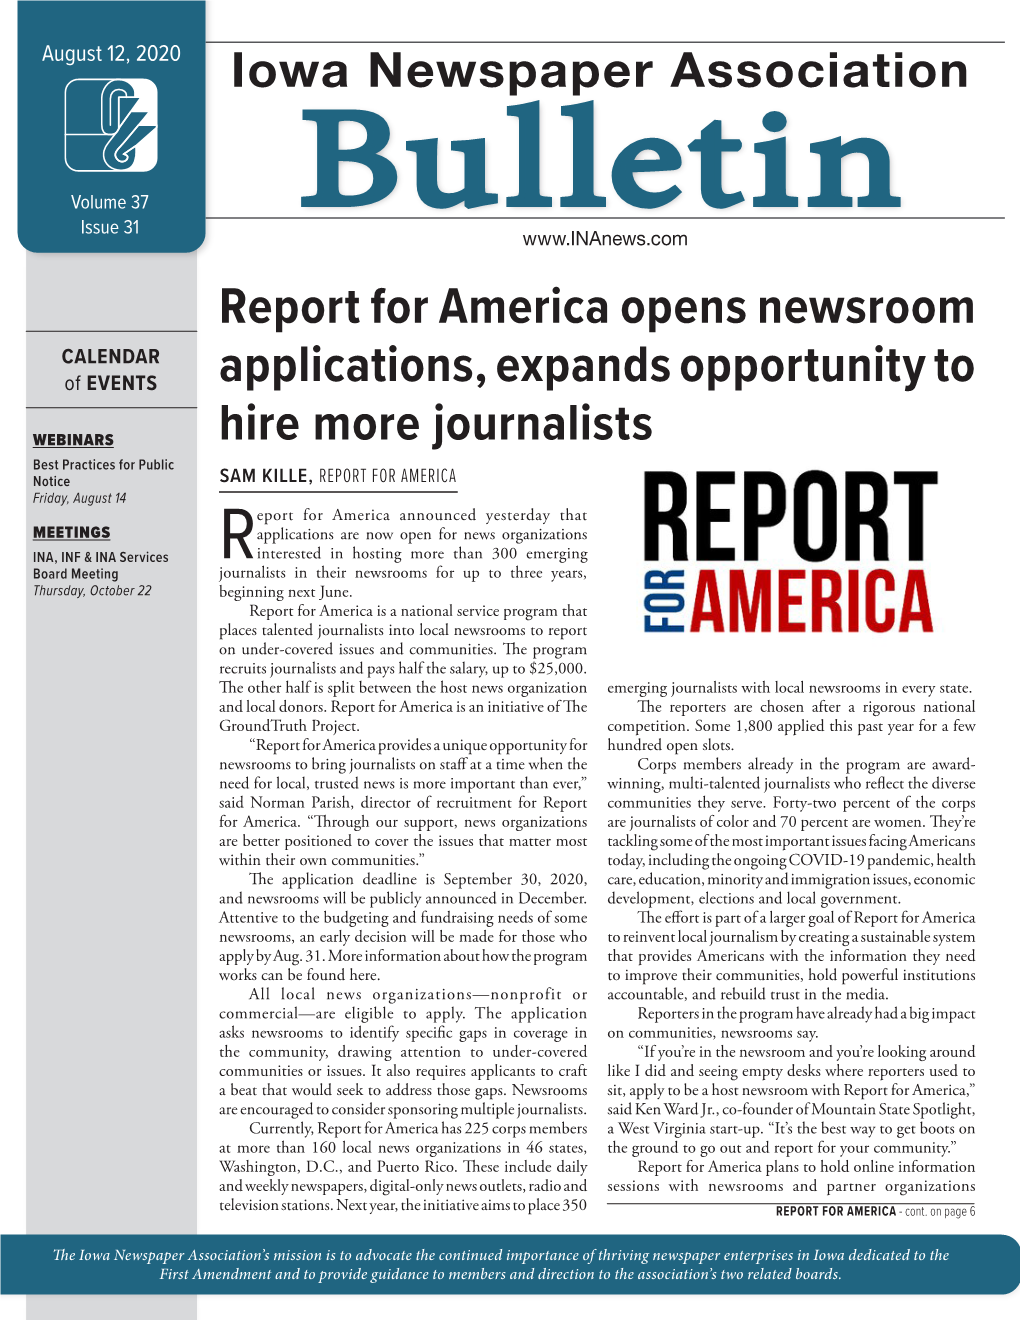 Report for America Opens Newsroom Applications, Expands Opportunity